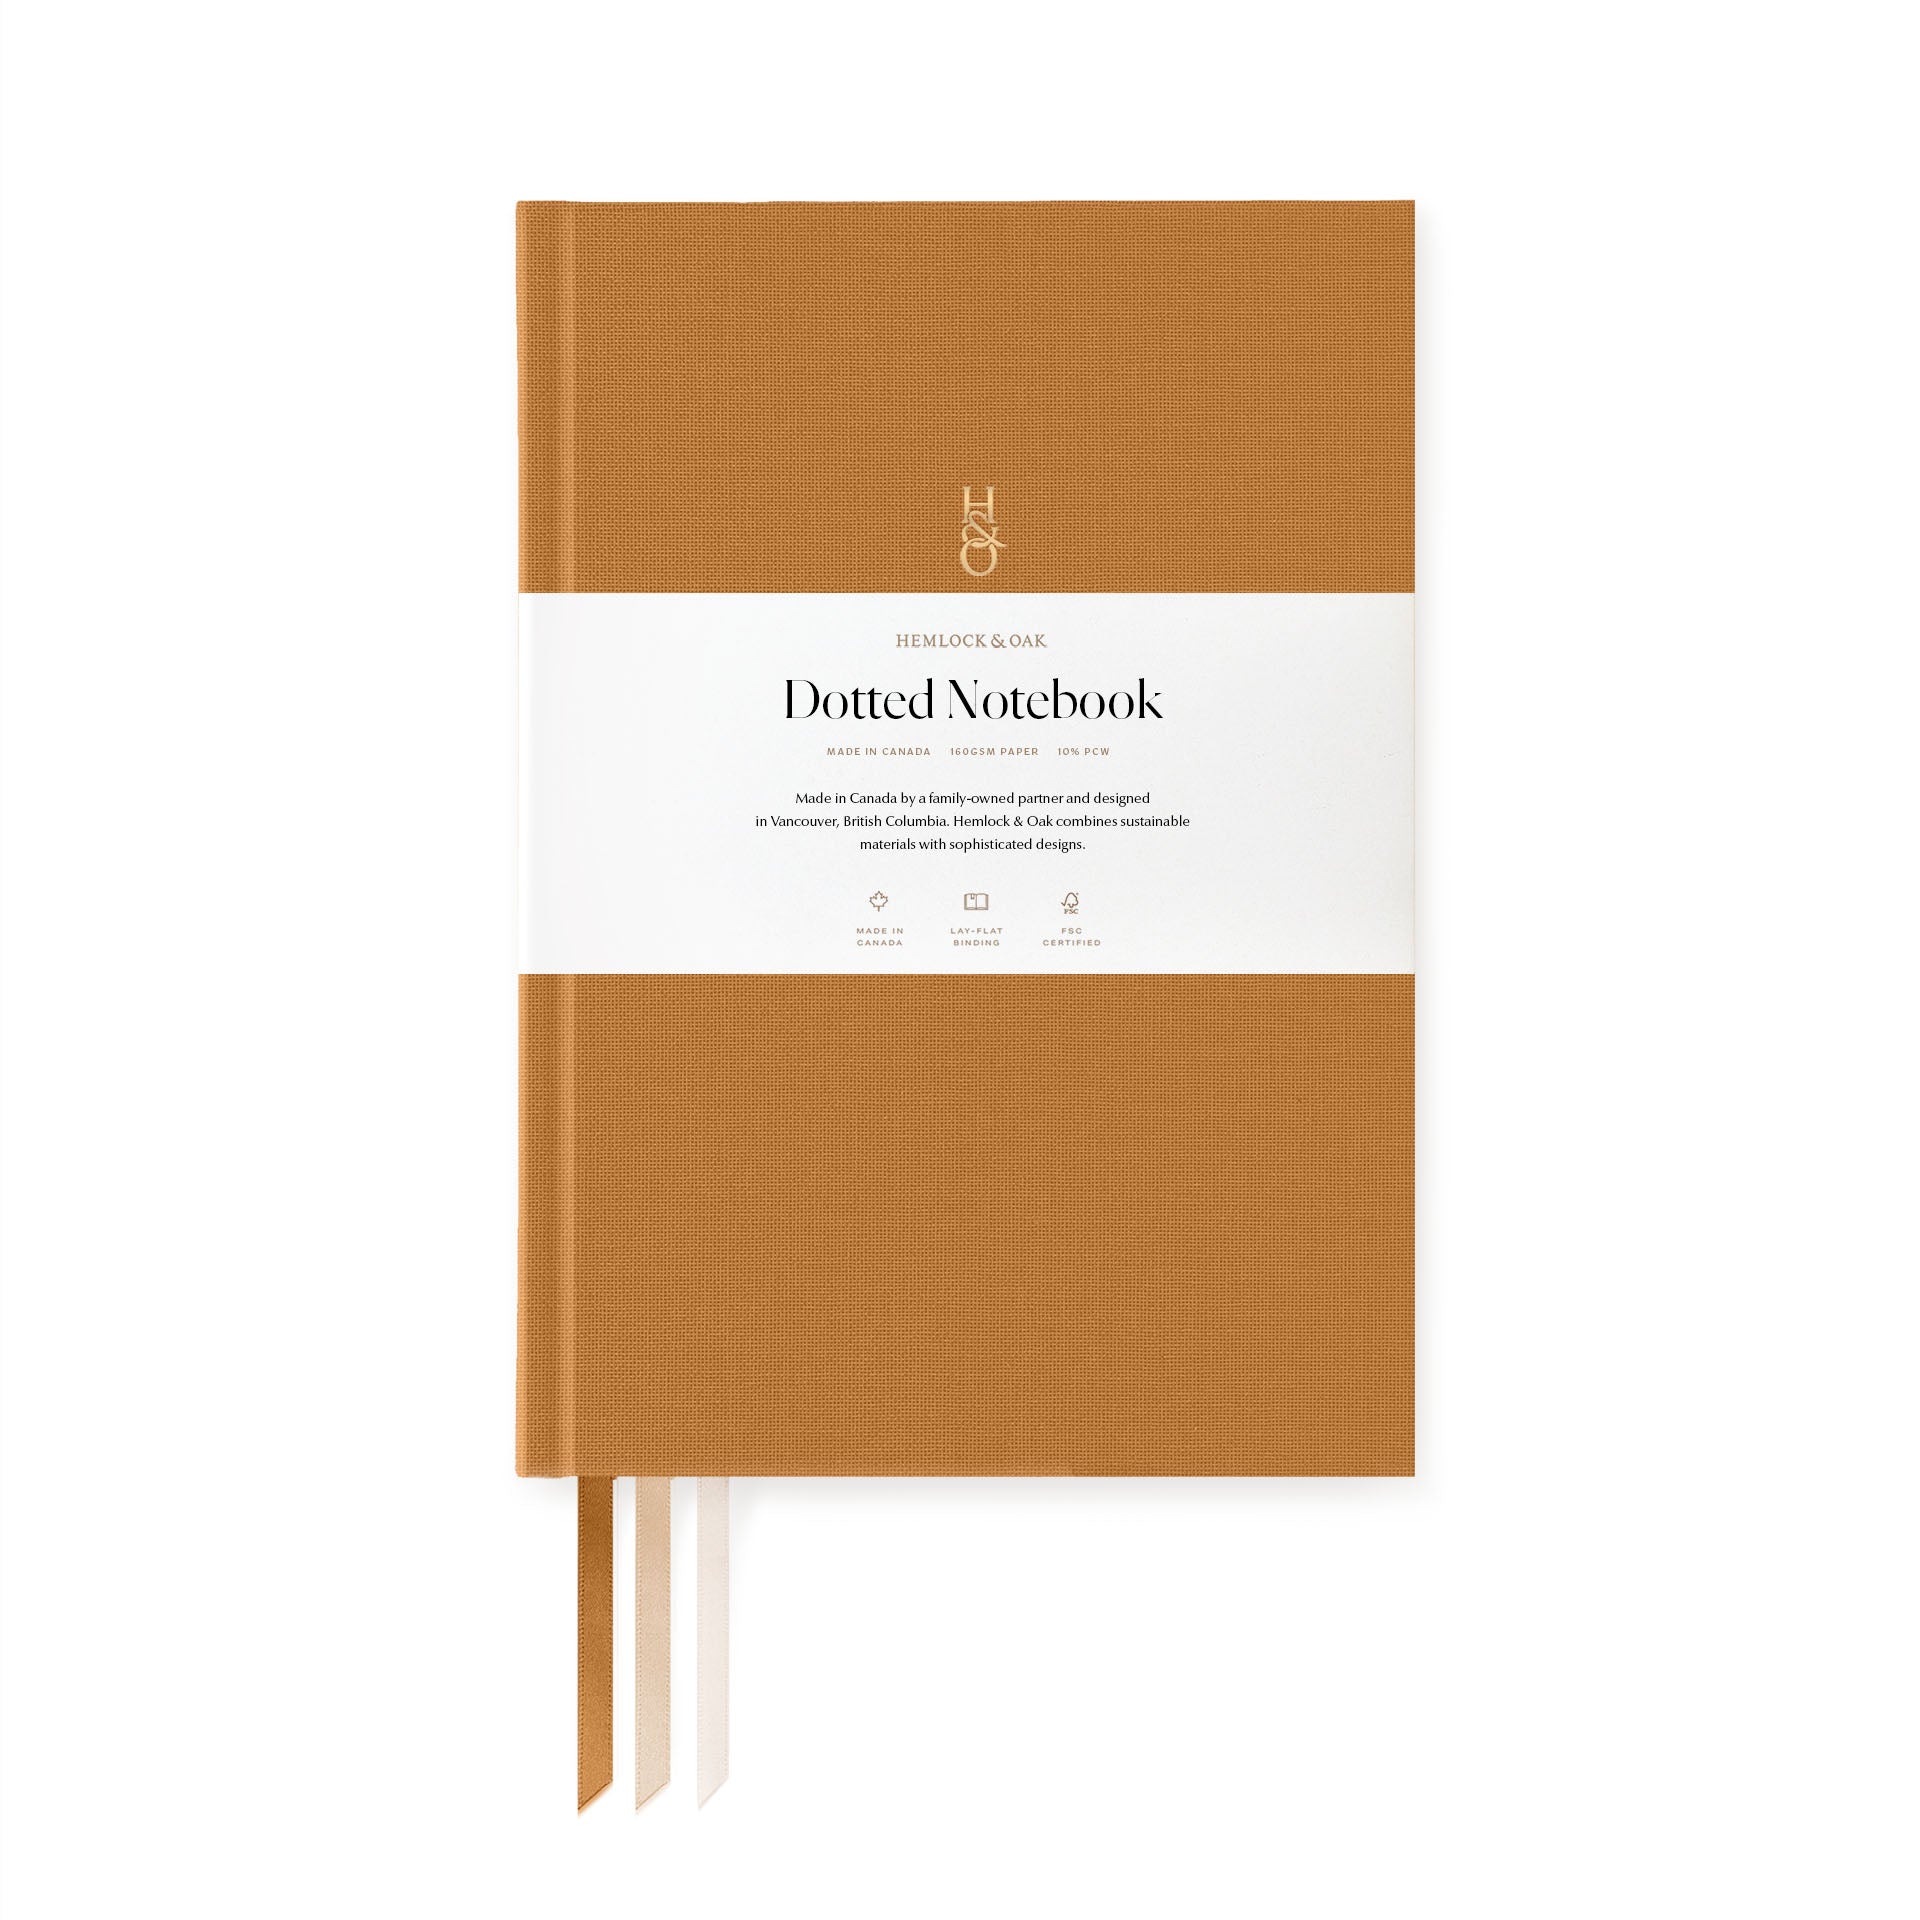 Notebooks (Imperfect) Marigold - Dotted Paper - Vertical Logo Foil #color_ Marigold - Dotted Paper - Vertical Logo Foil